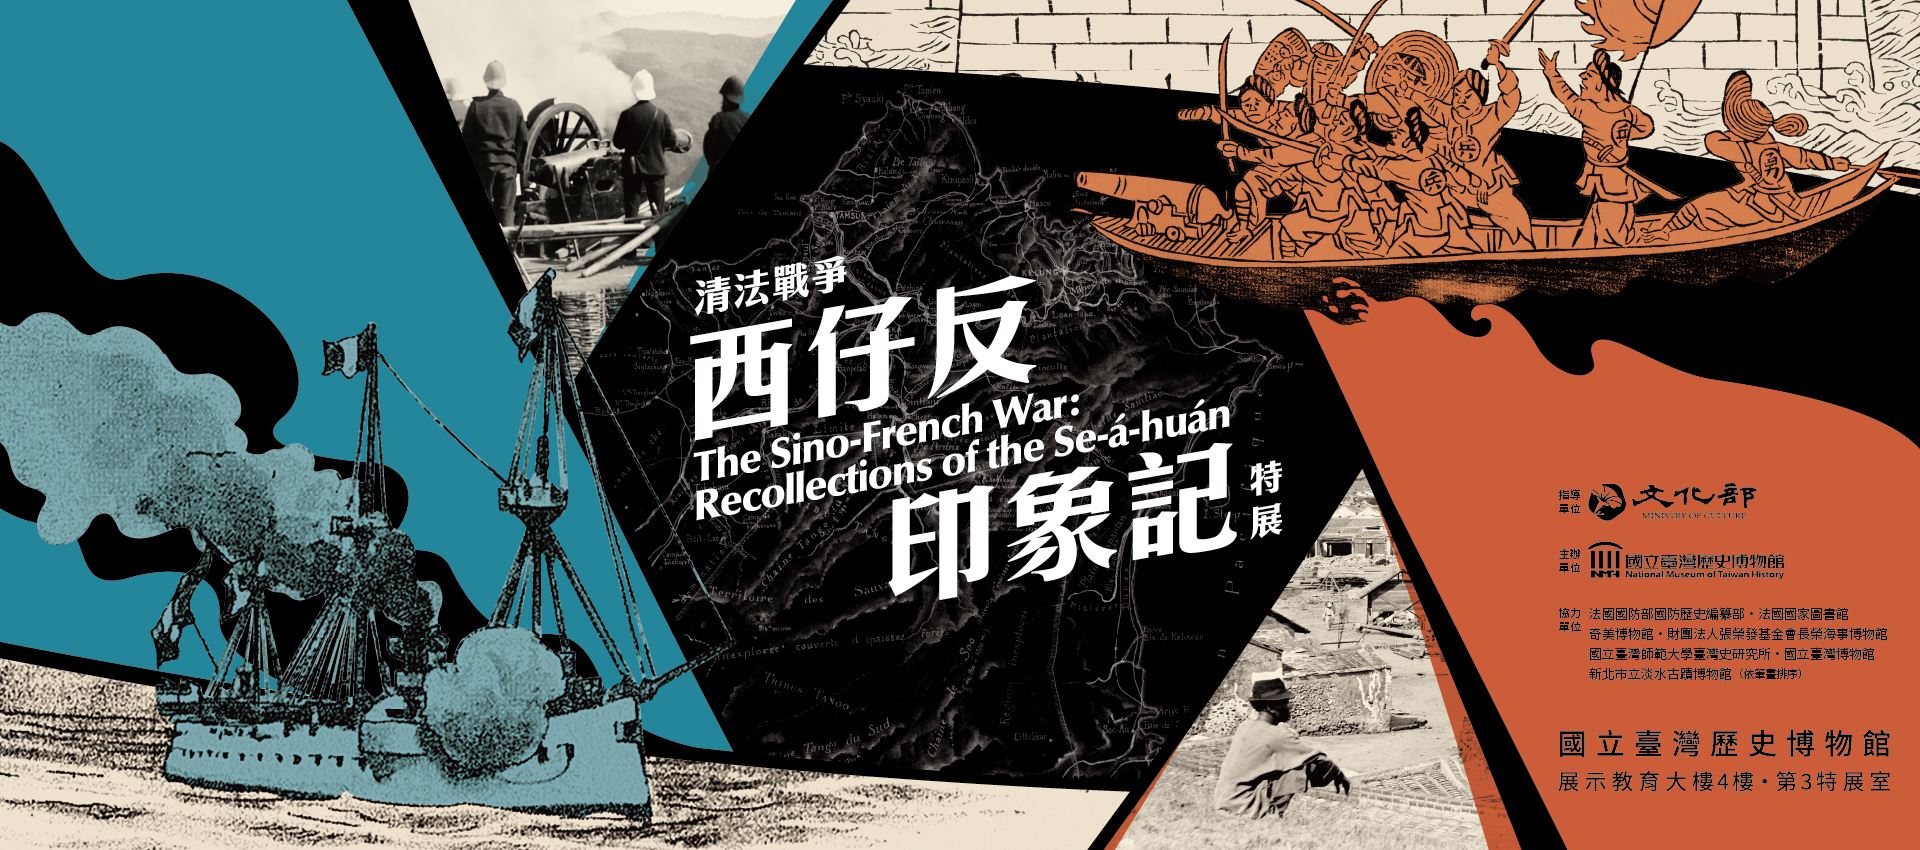 The Sino-French War: Recollections of the Se'á'huan